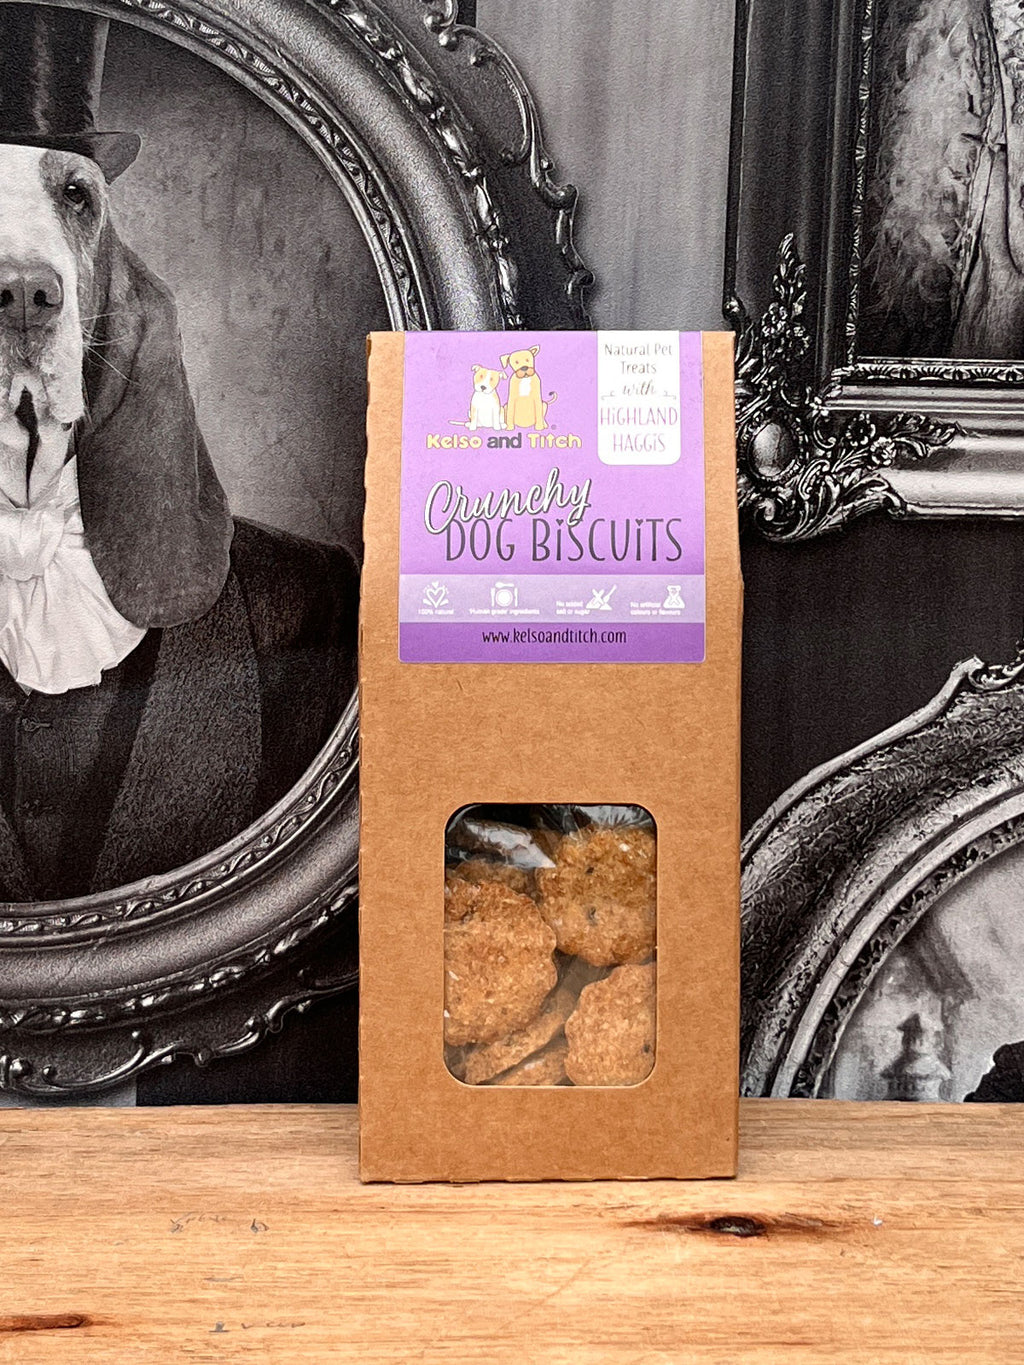 Kelso and Titch Crunchy Dog Biscuits - Highland Haggis